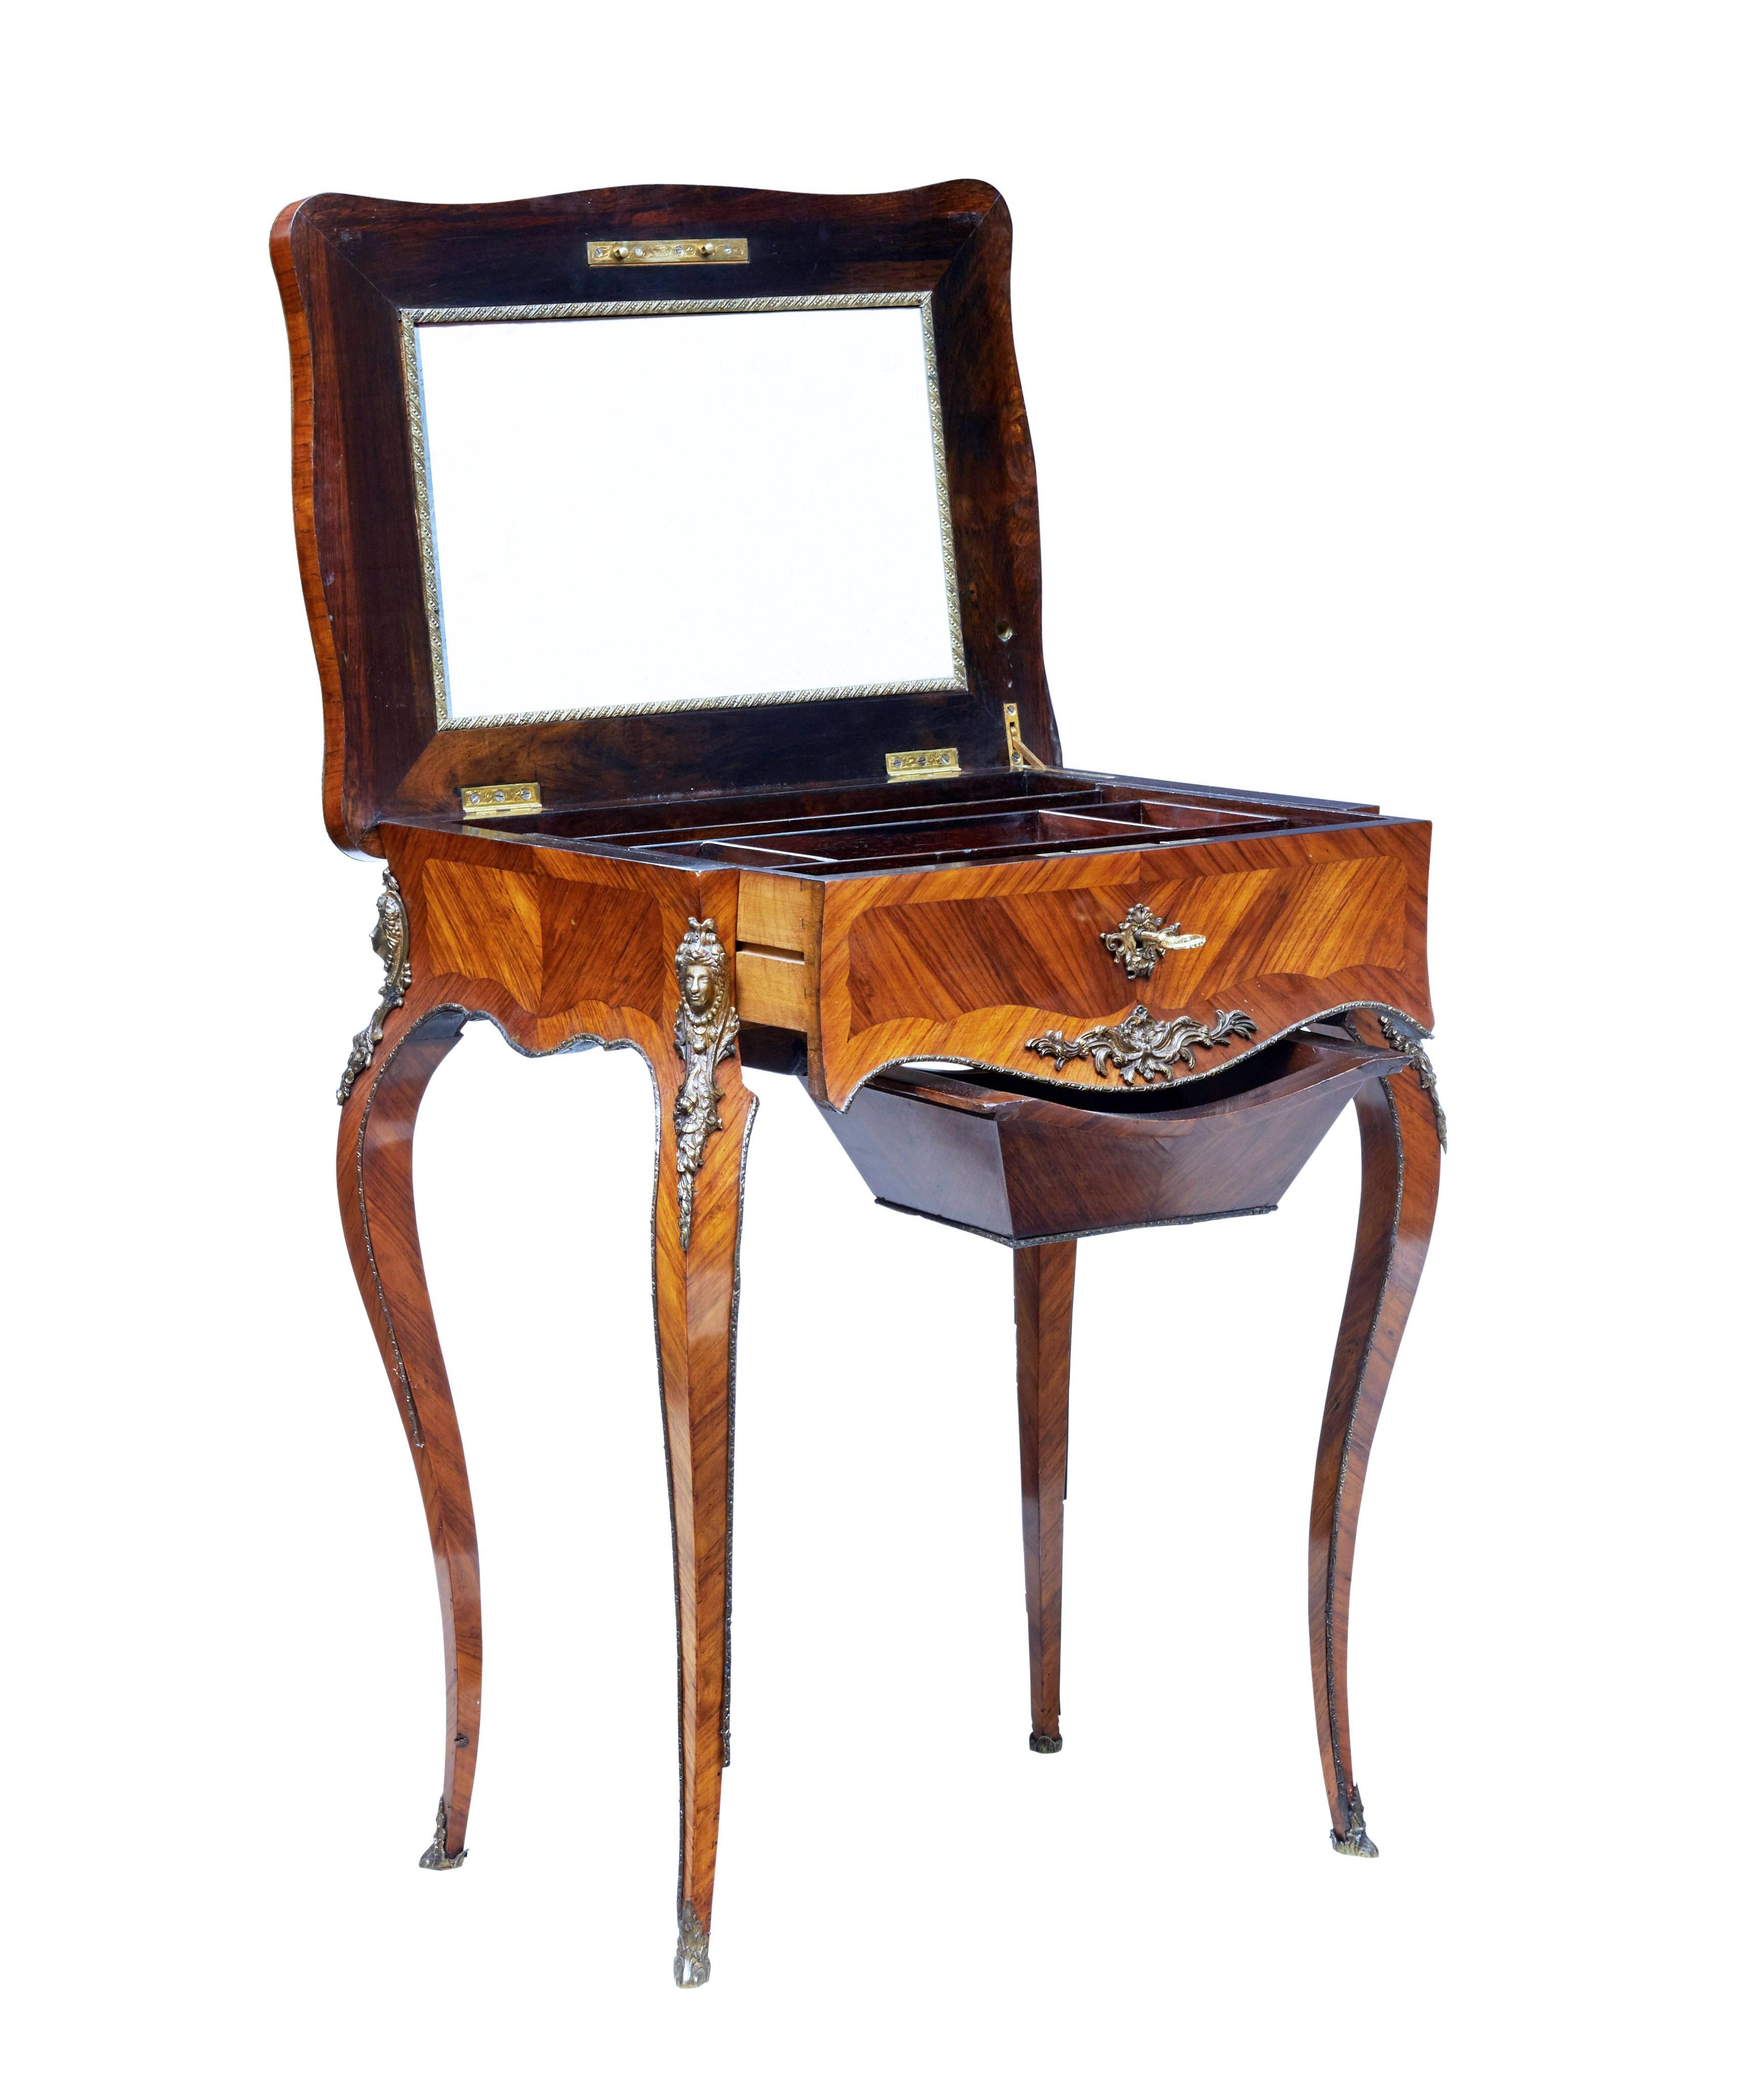 Victorian 19th Century French Kingwood Sewing Table